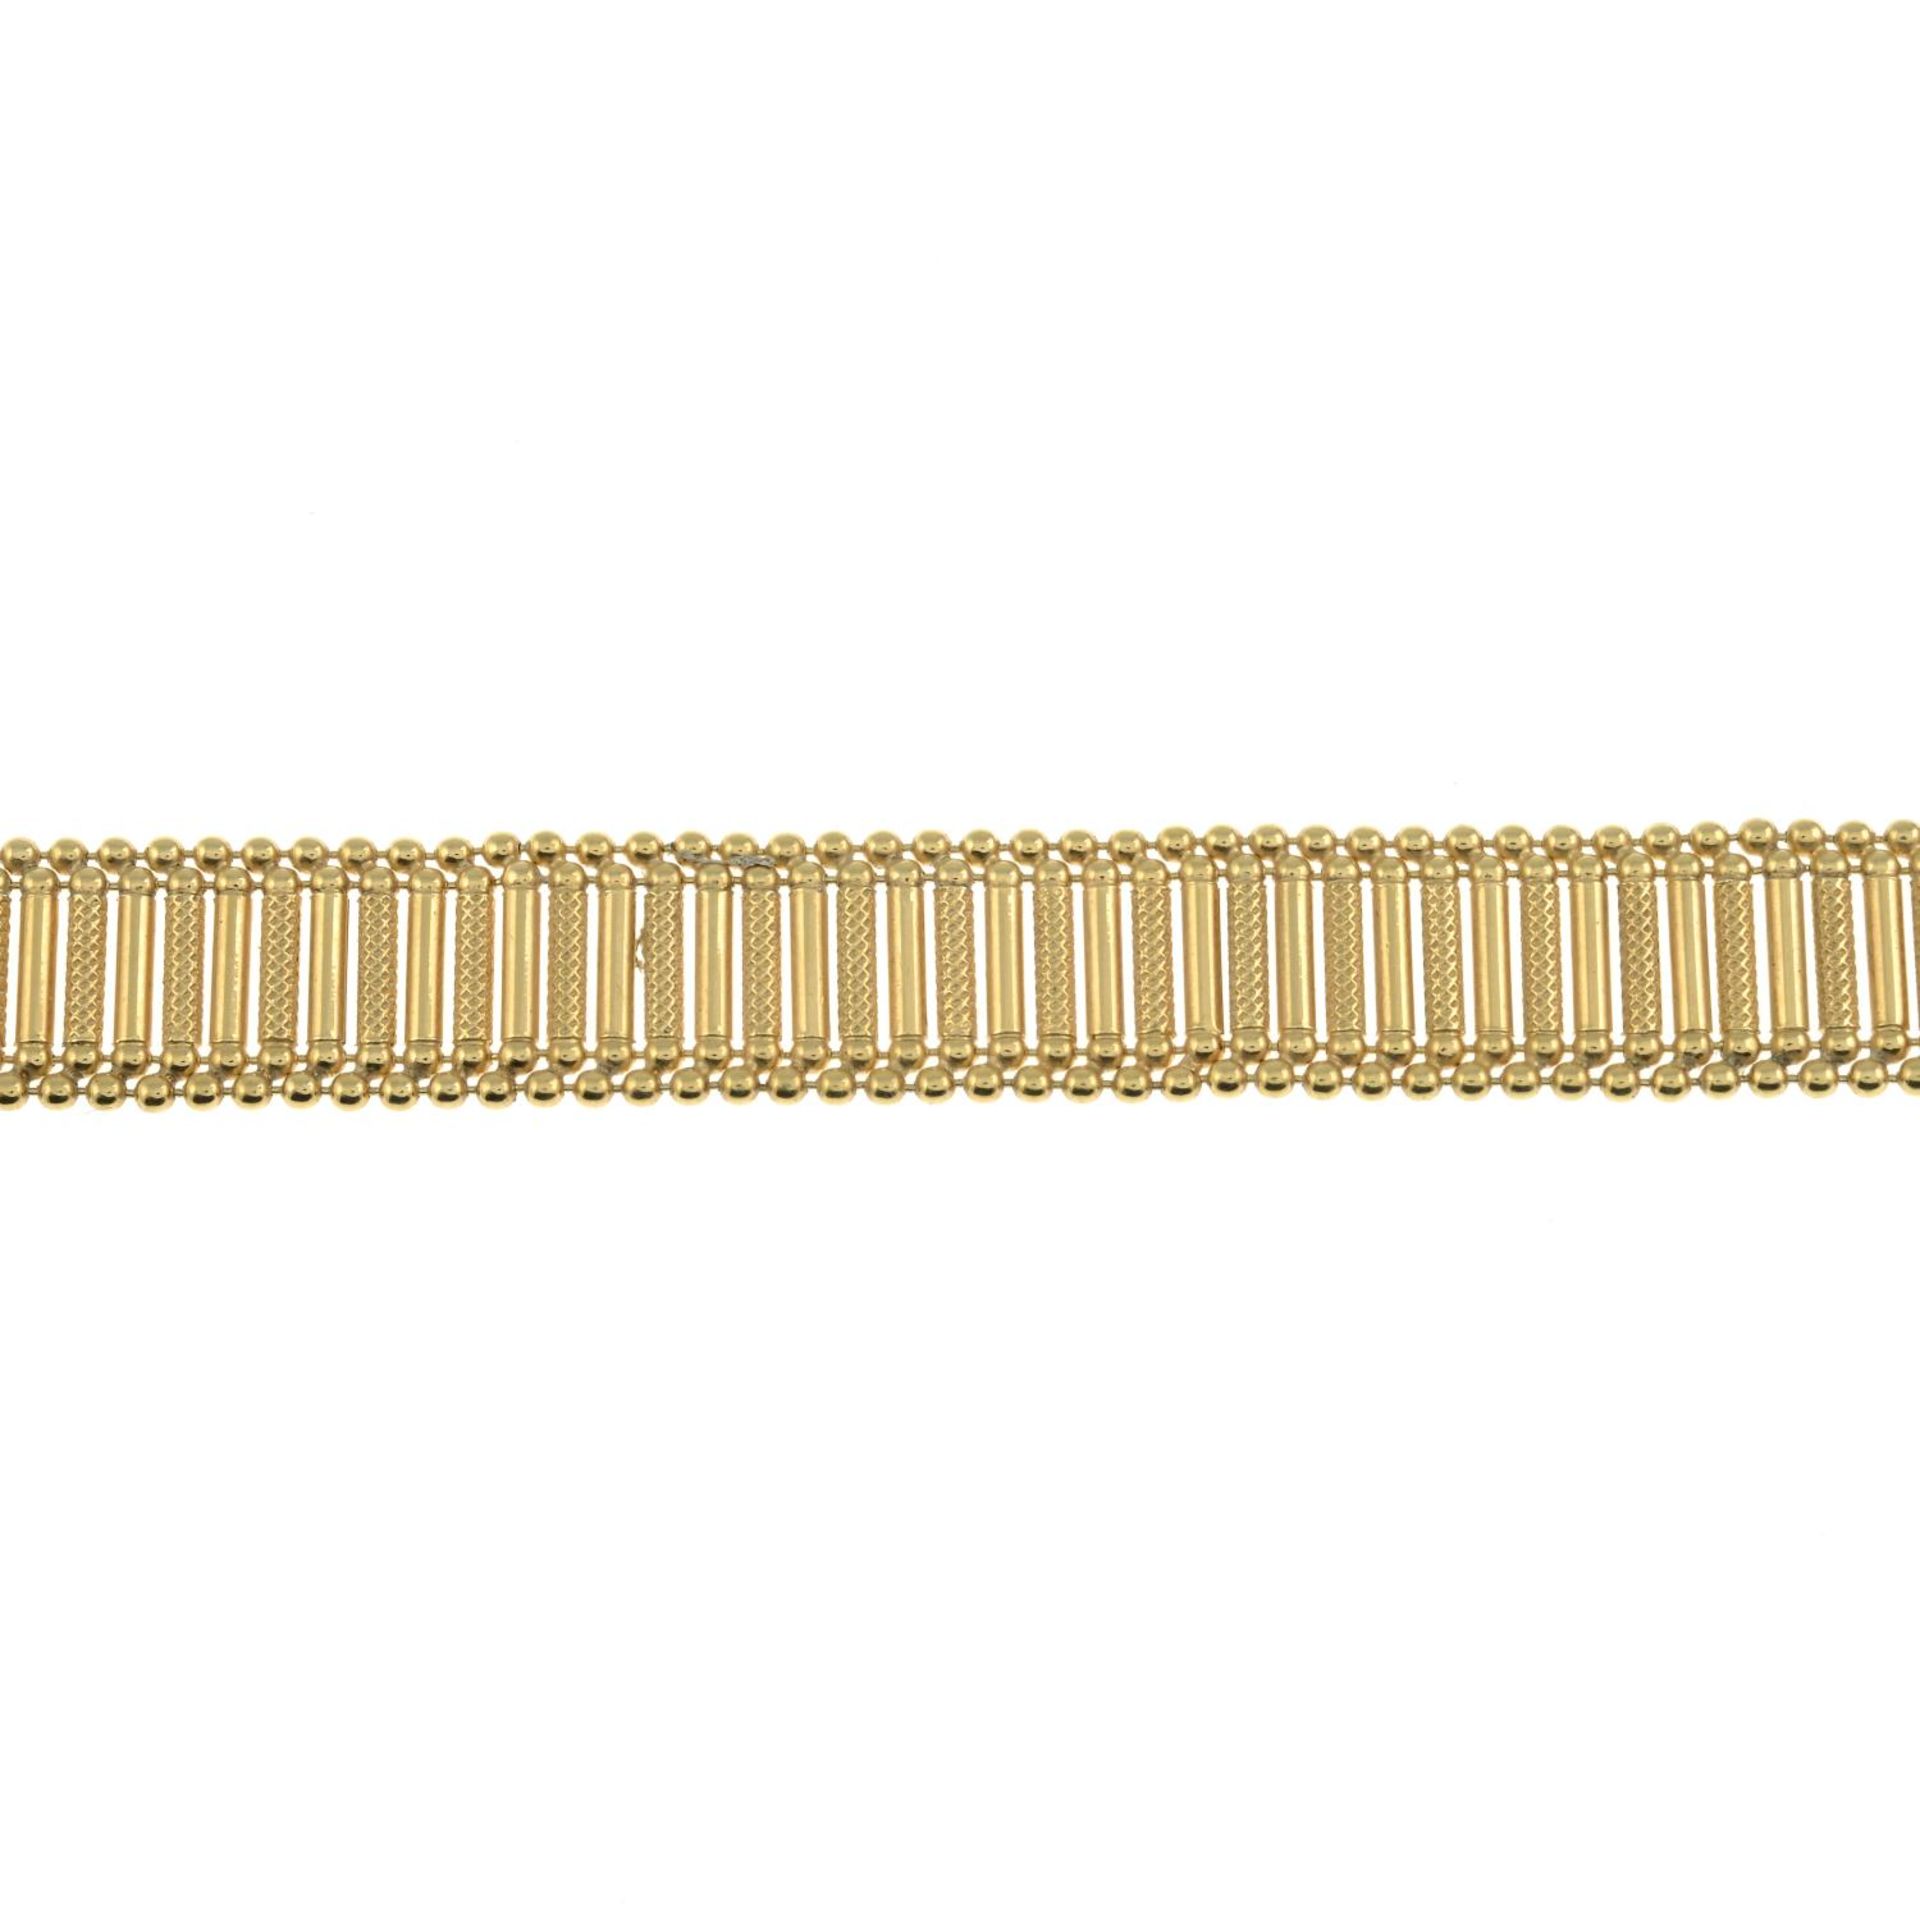 A 9ct gold polished and textured fancy-link bracelet.Import marks for 9ct gold.